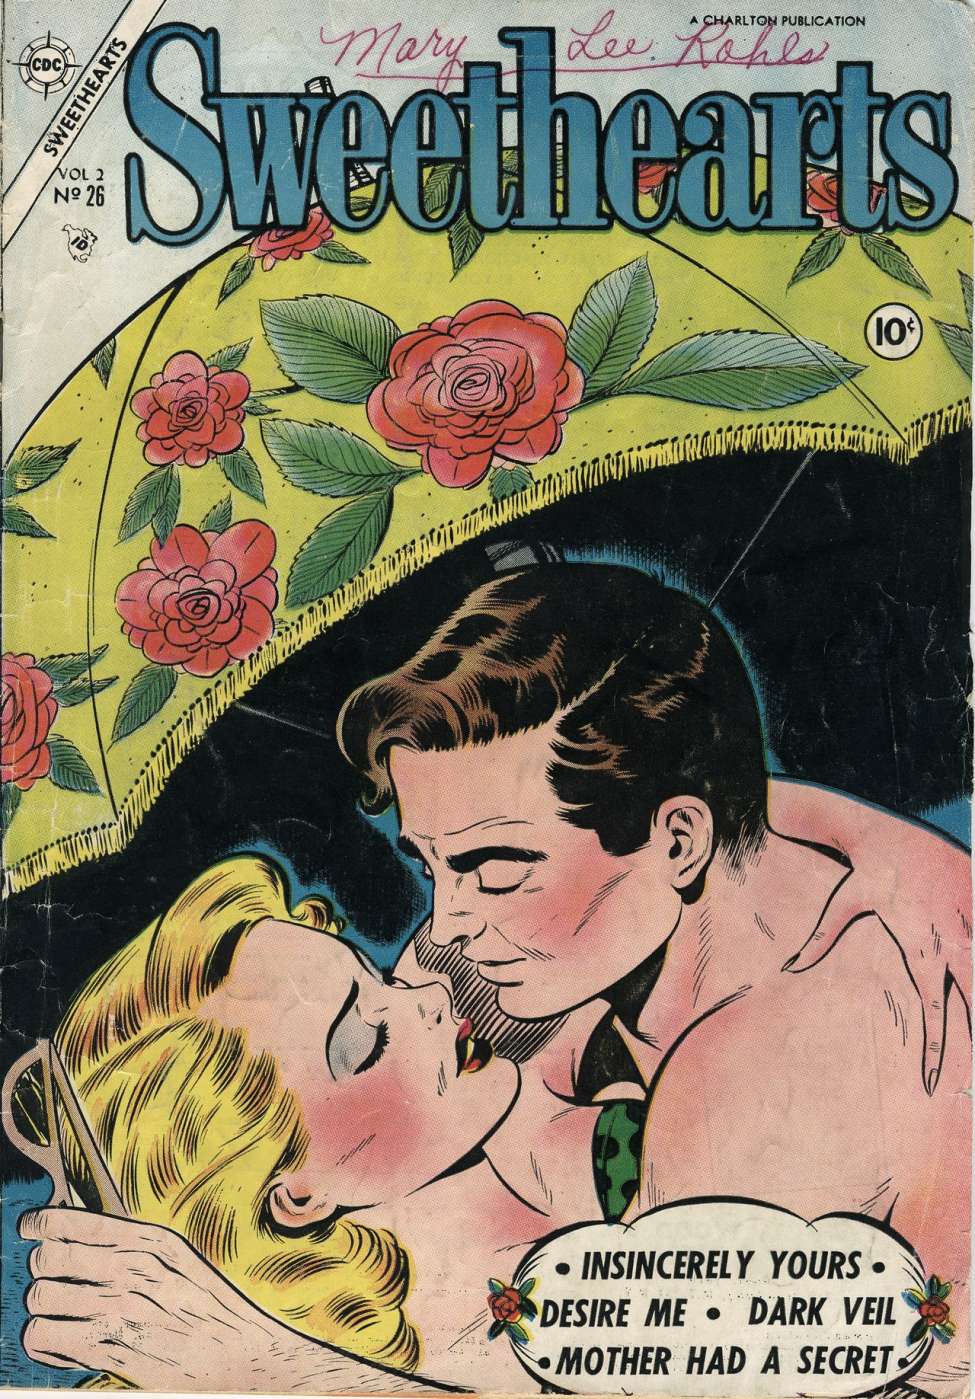 Book Cover For Sweethearts 26 - Version 2